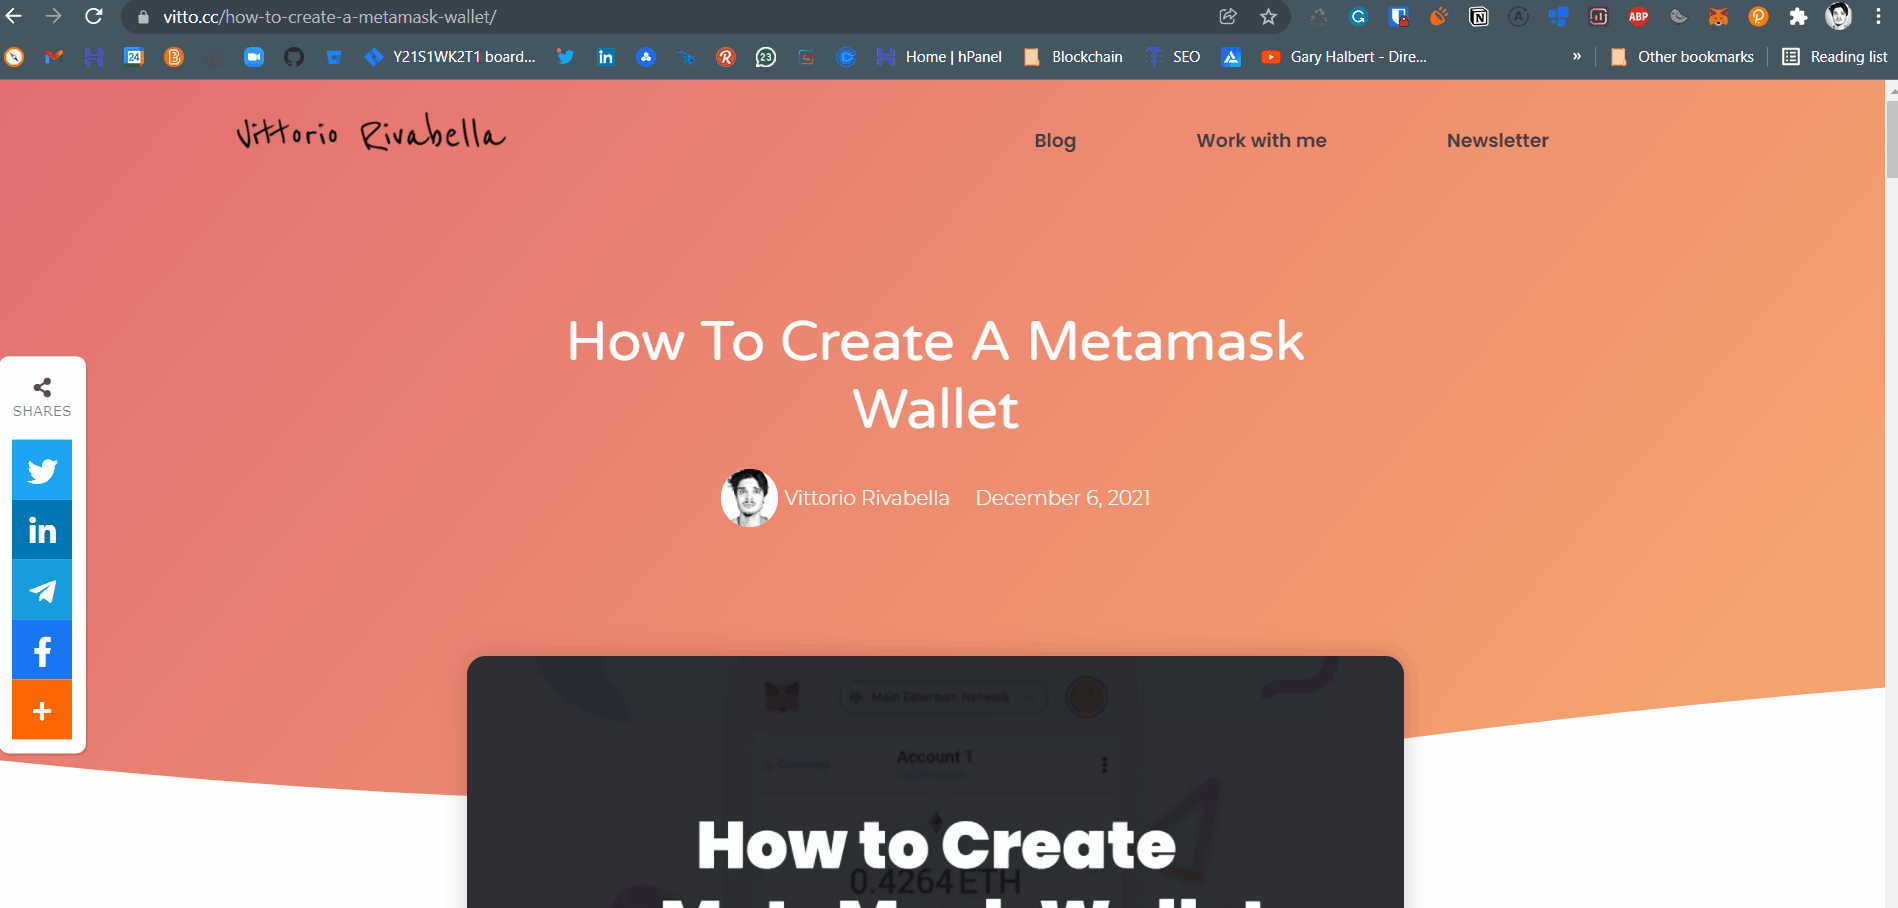 Grabbing Metamask's wallet private key to deploy the Token